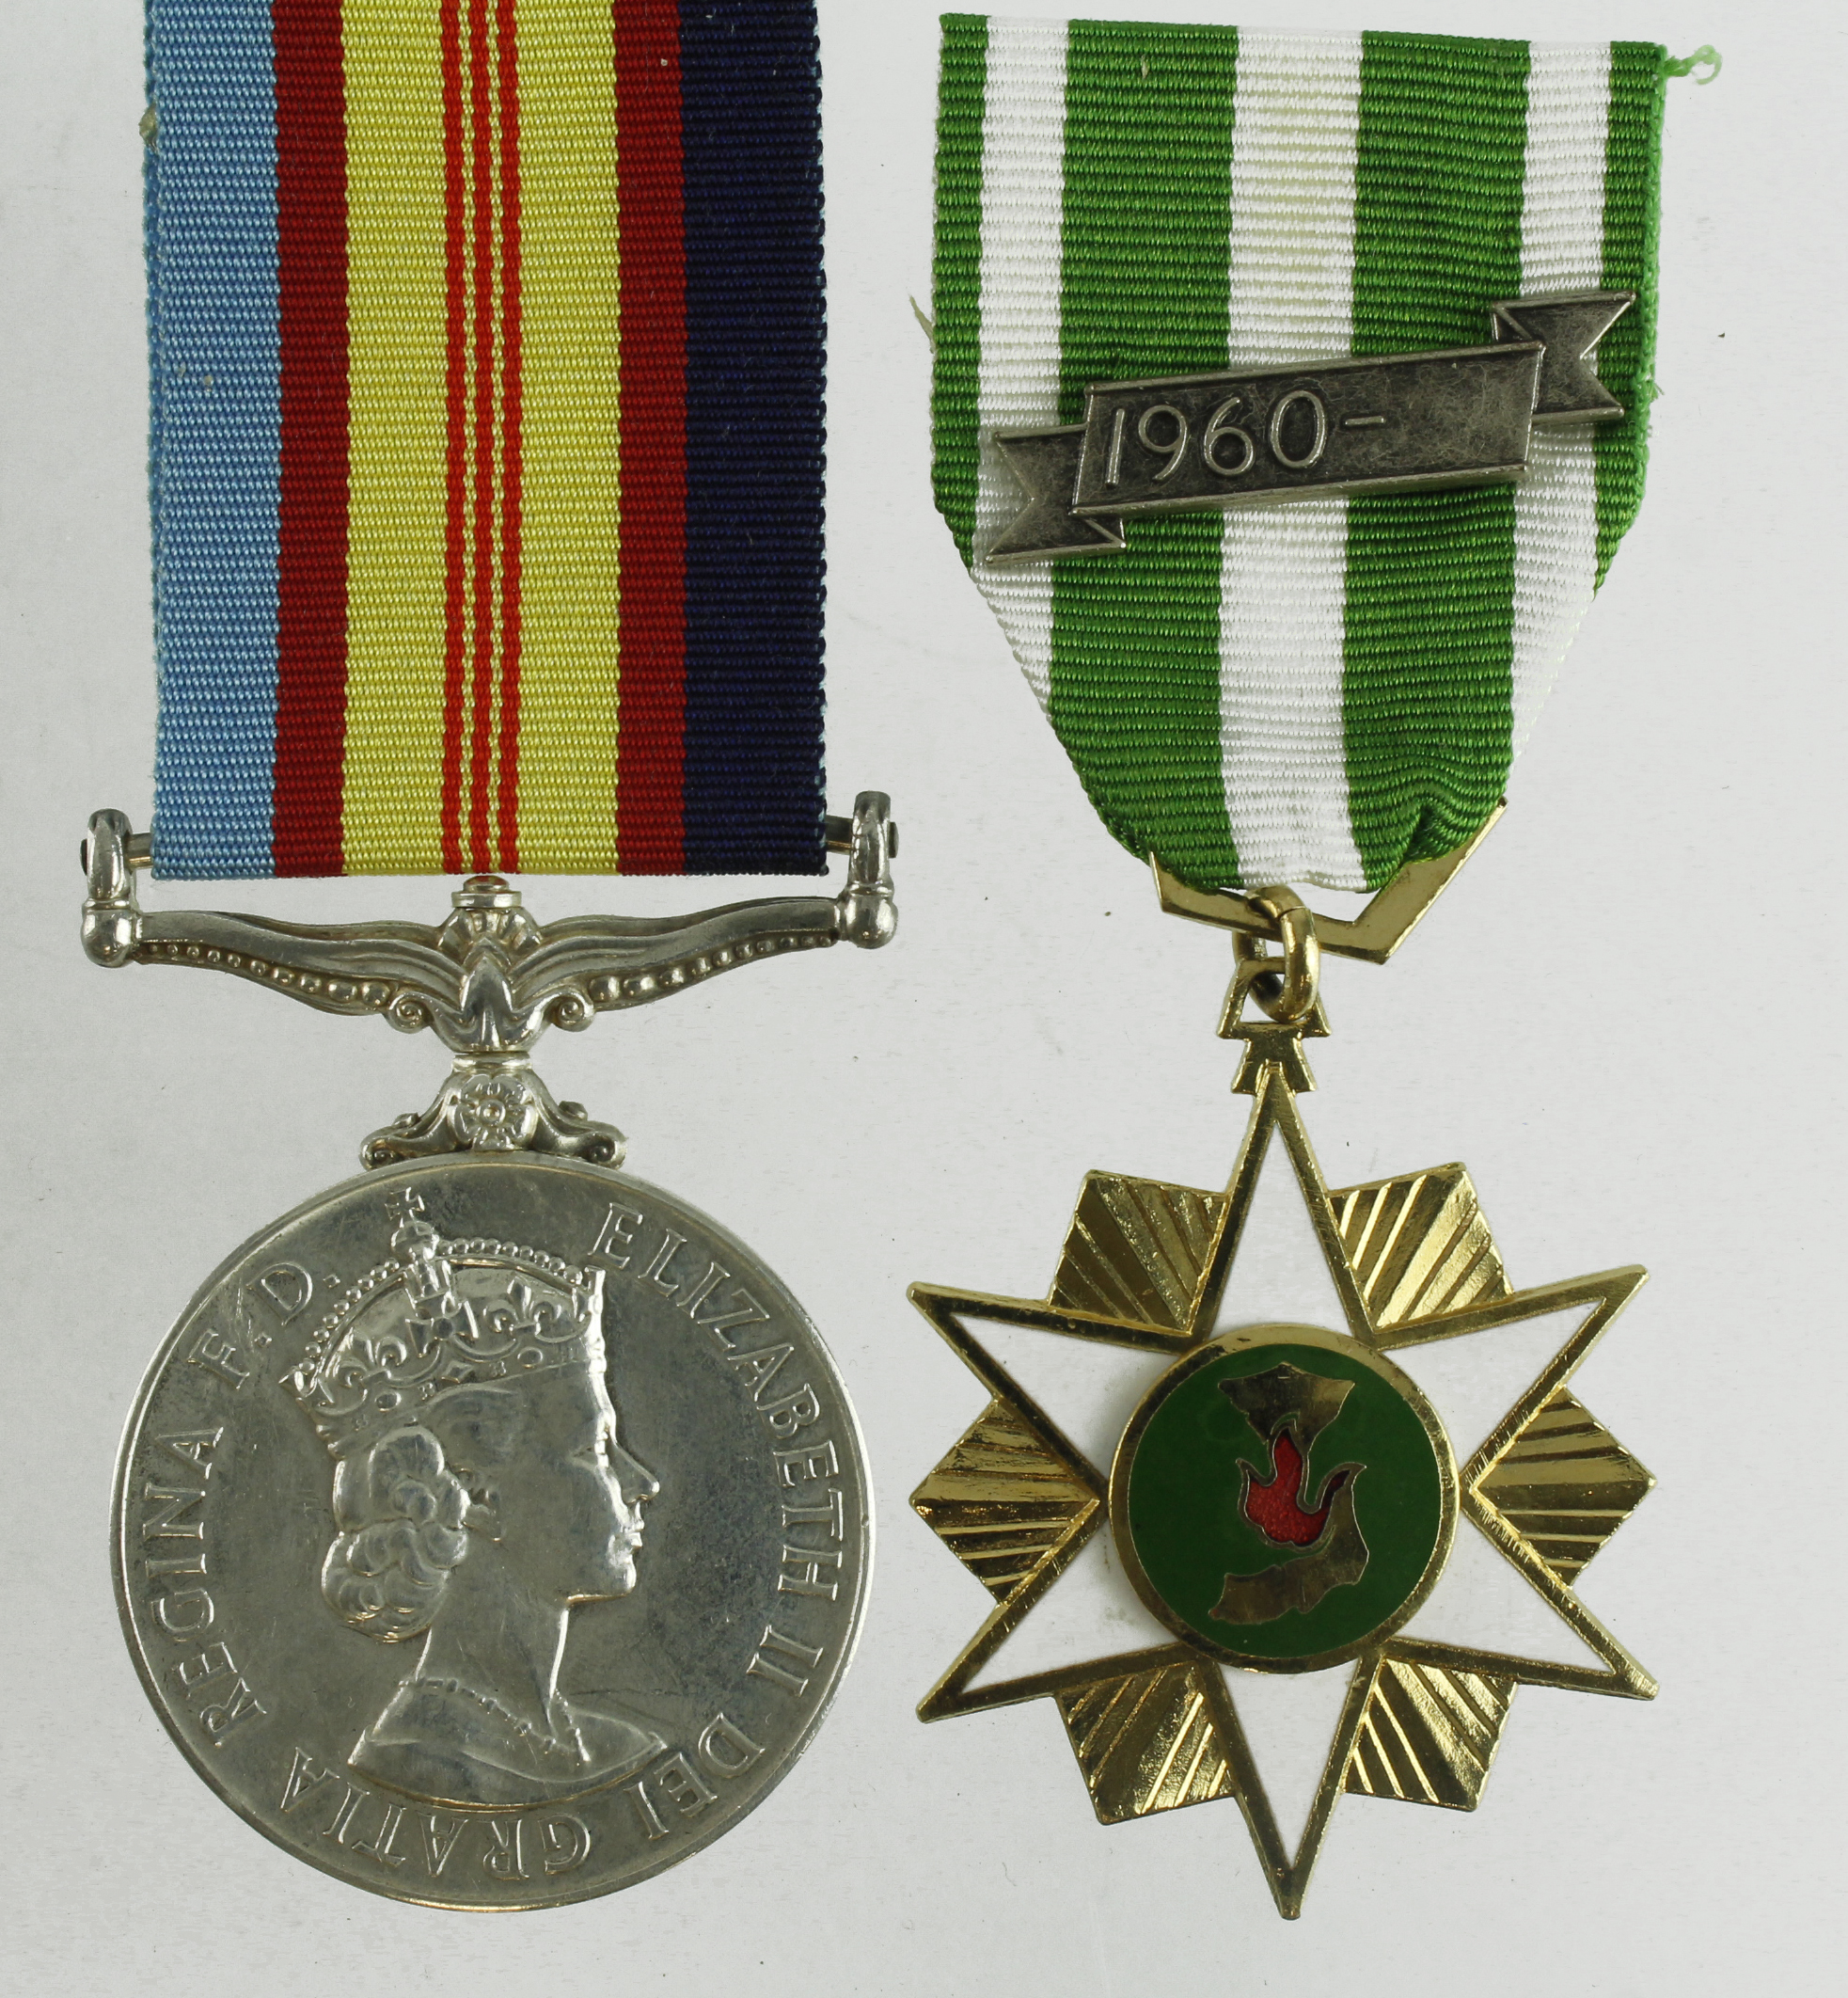 Vietnam Medal 1968 (2785944 J F Nicholson) large capitals, and South Vietnam Campaign Medal with